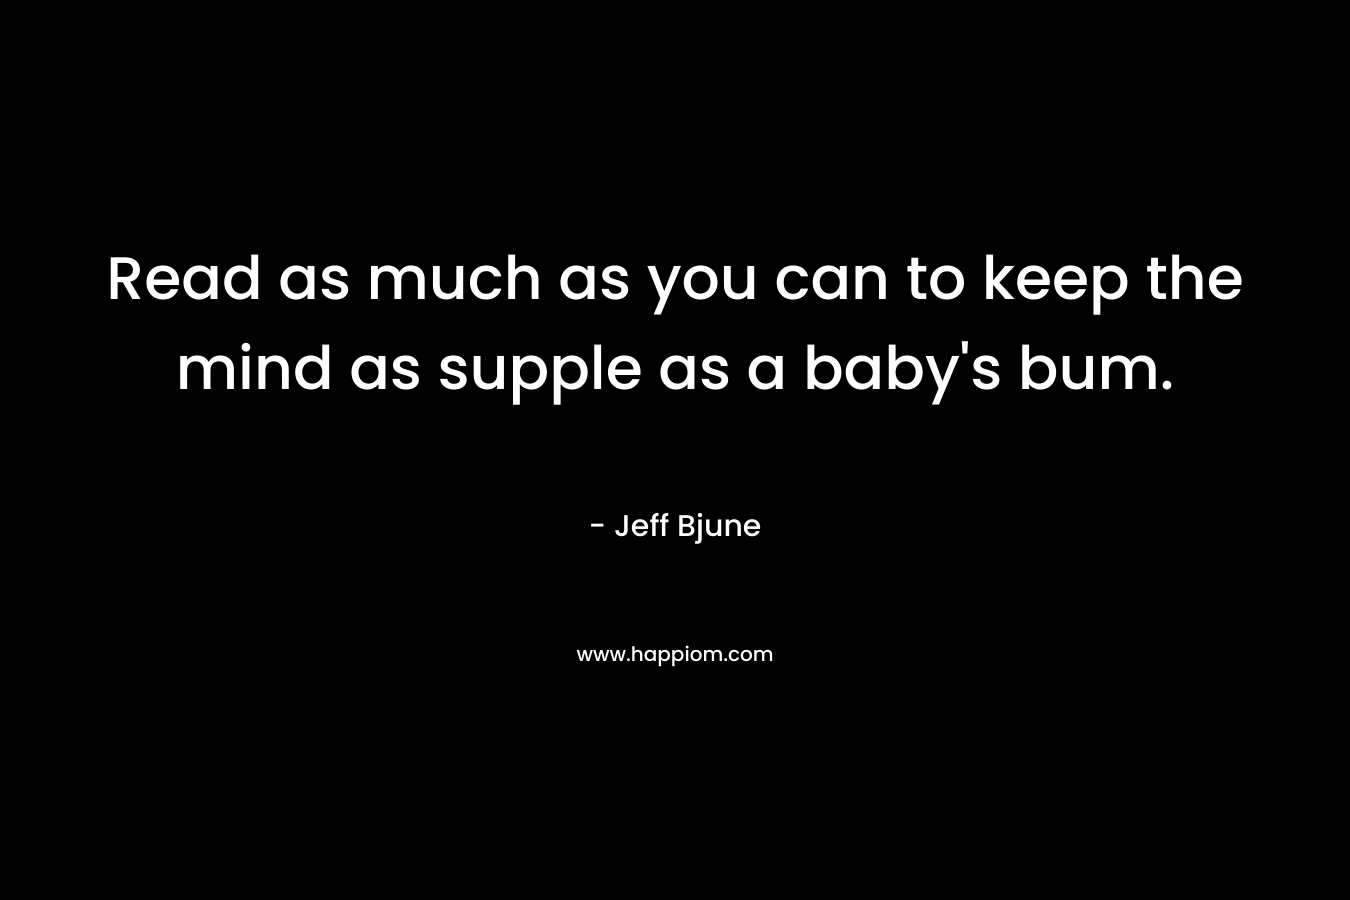 Read as much as you can to keep the mind as supple as a baby’s bum. – Jeff Bjune